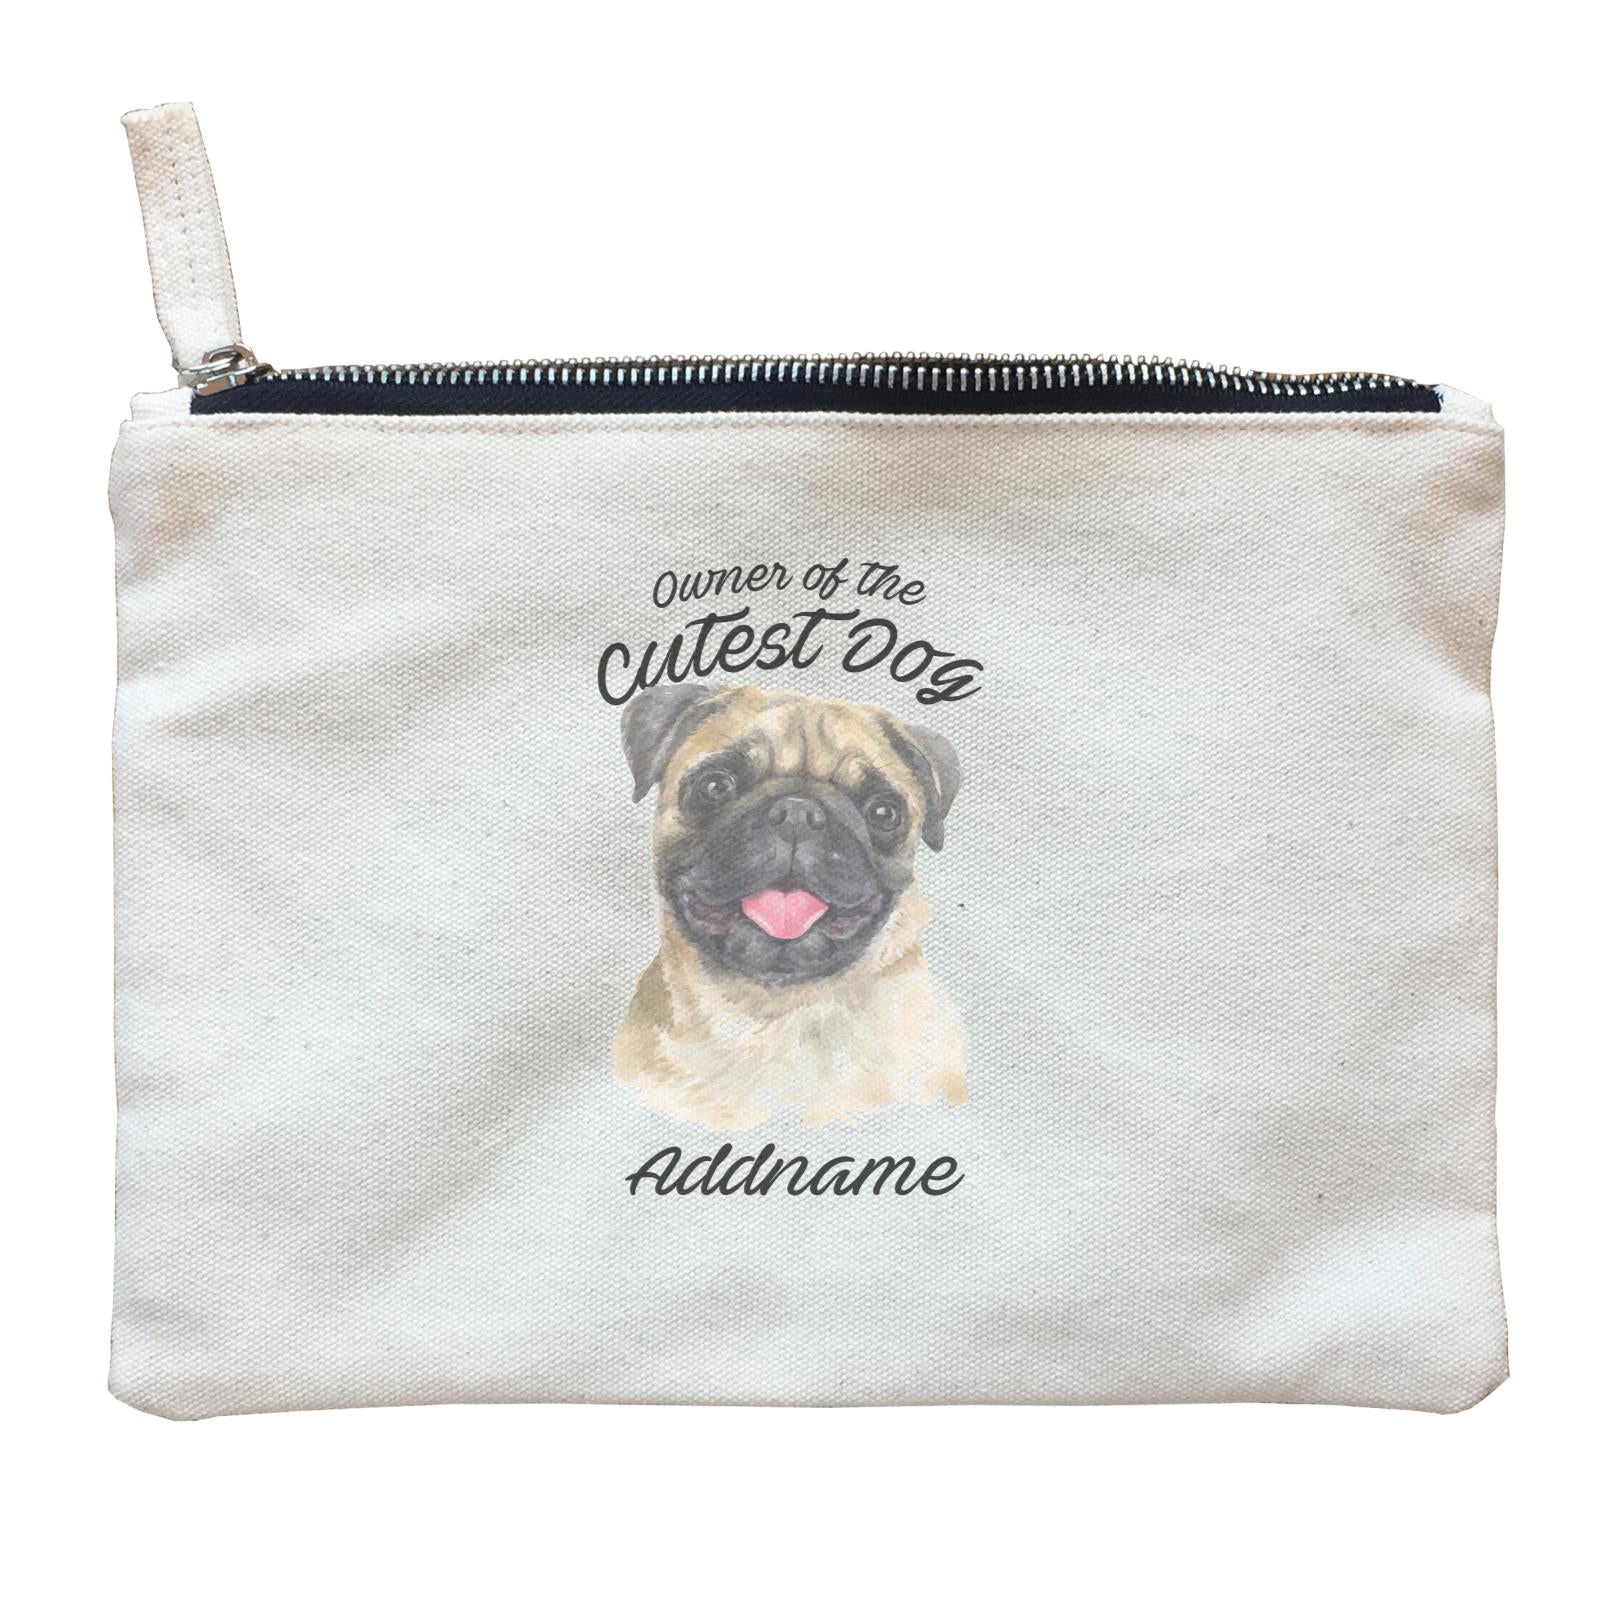 Watercolor Dog Owner Of The Cutest Dog Pug Addname Zipper Pouch